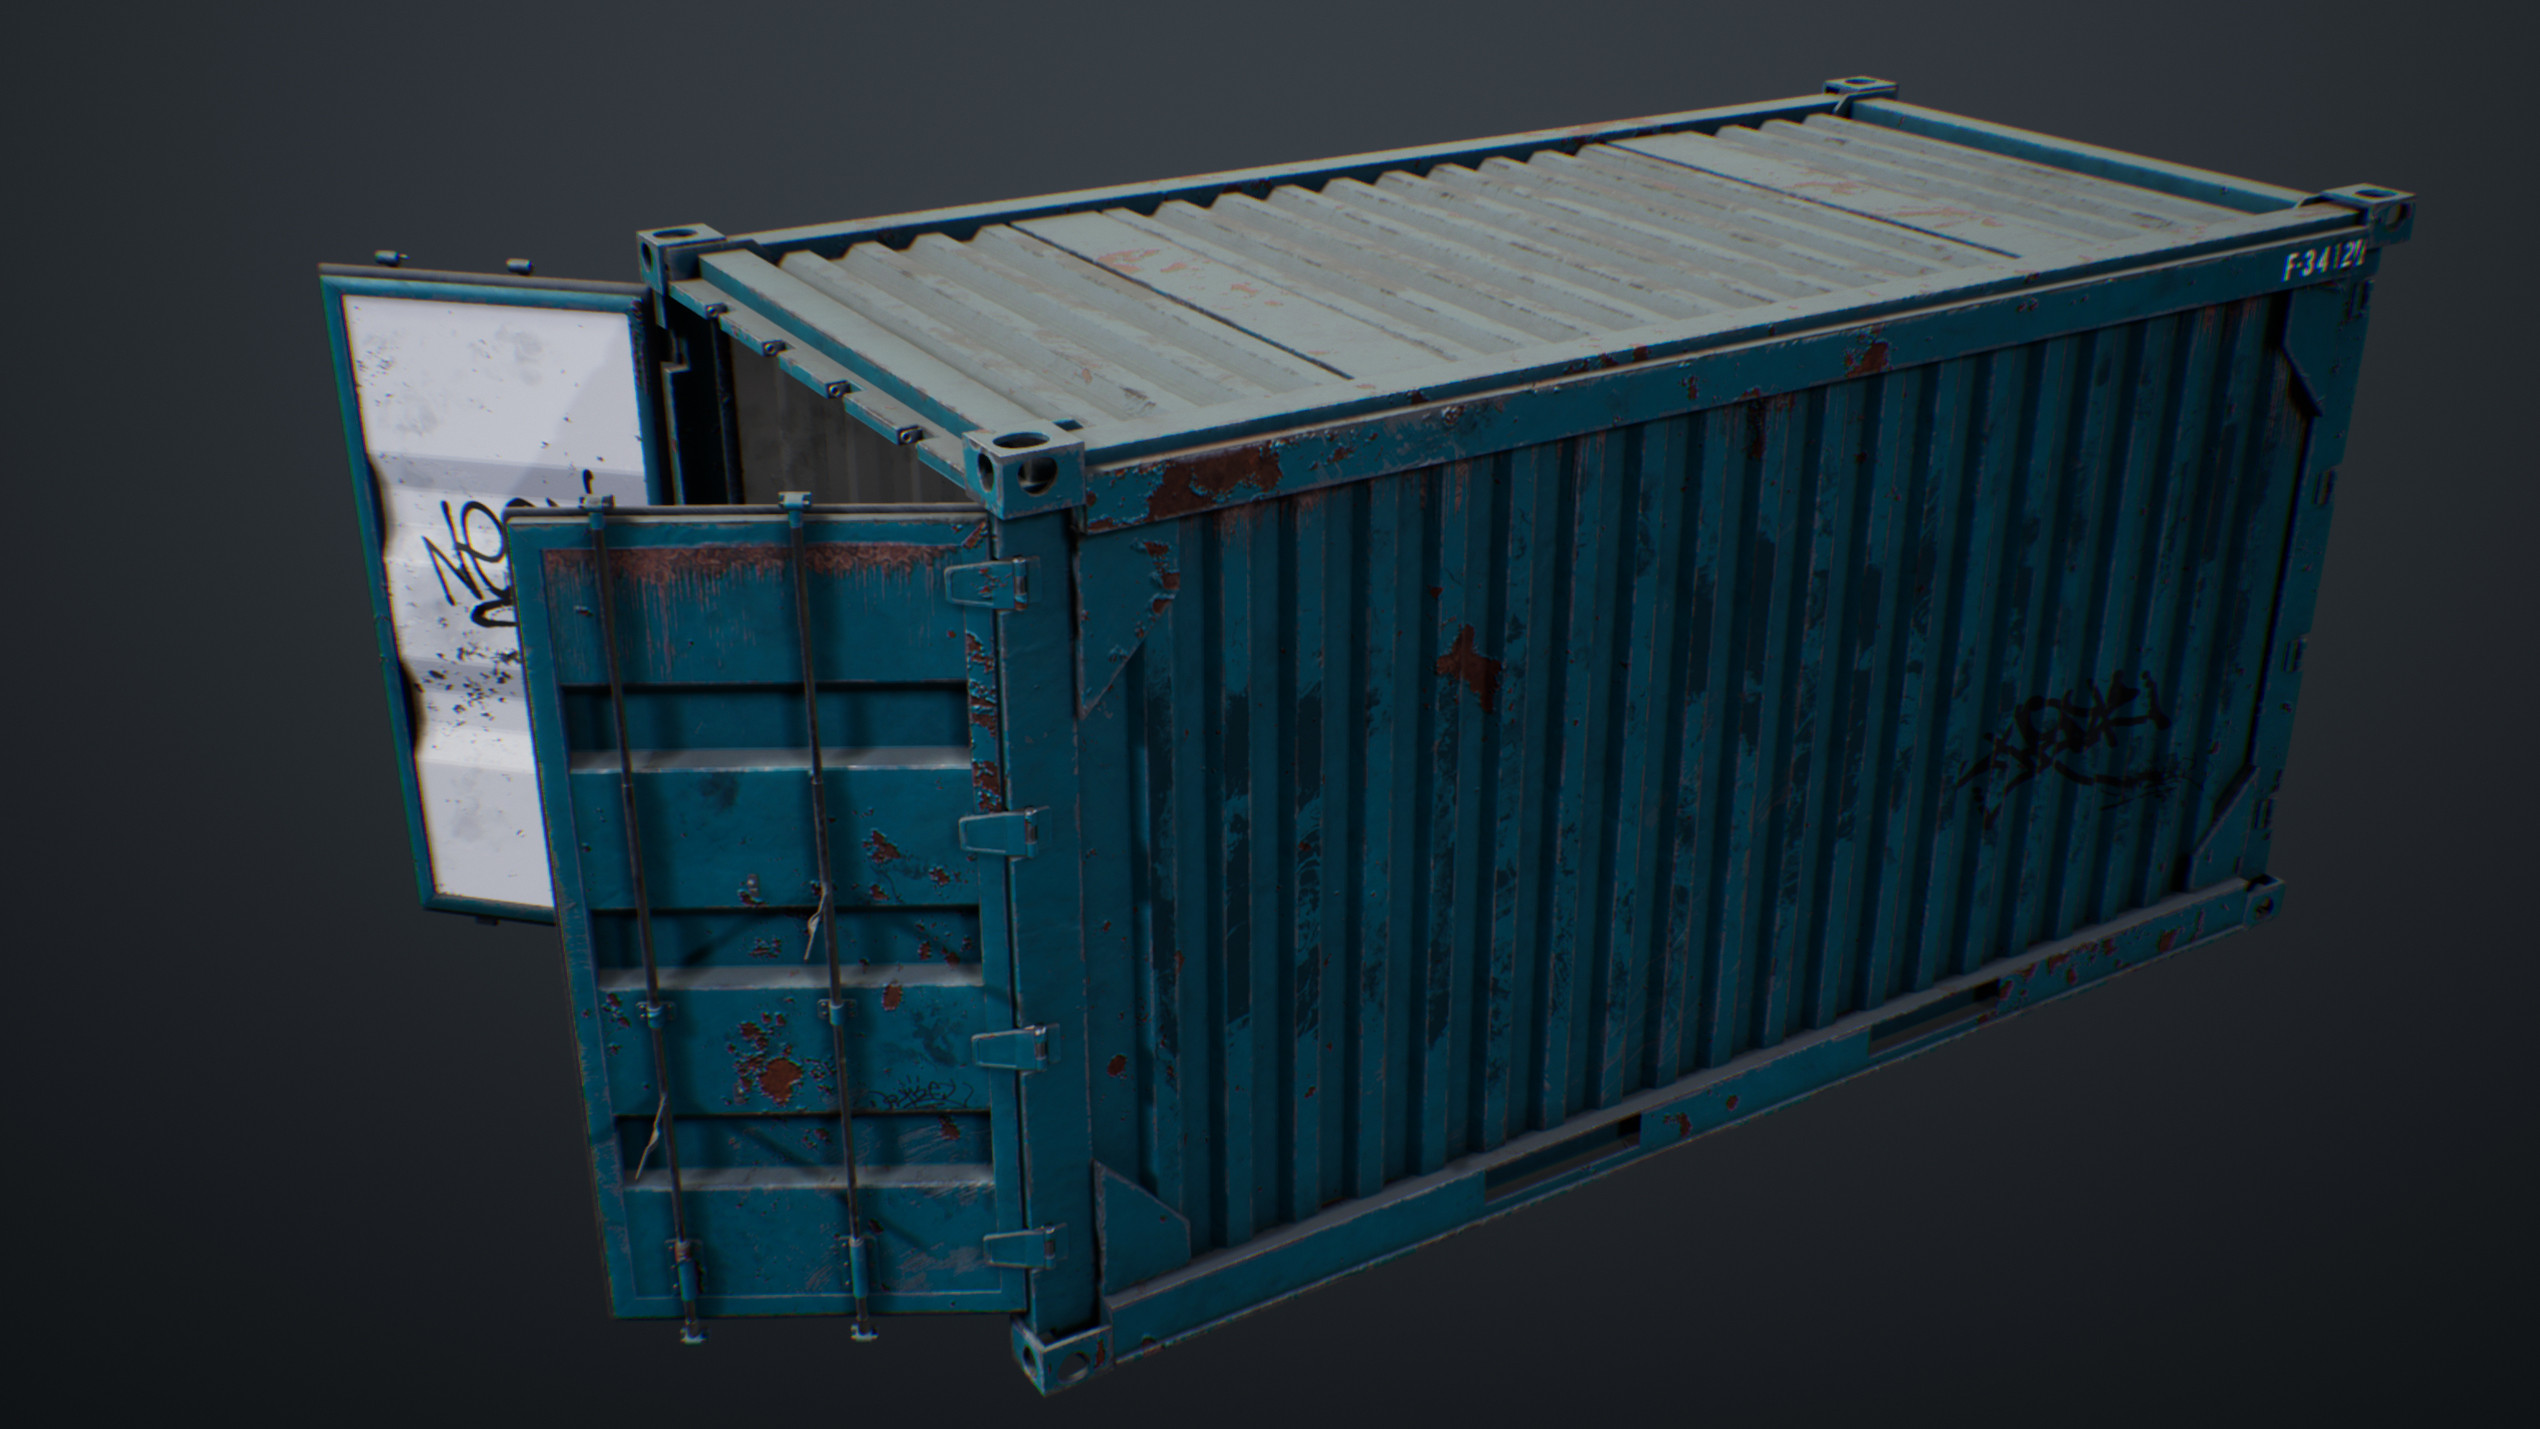 UE4 screenshot of the container front right view.